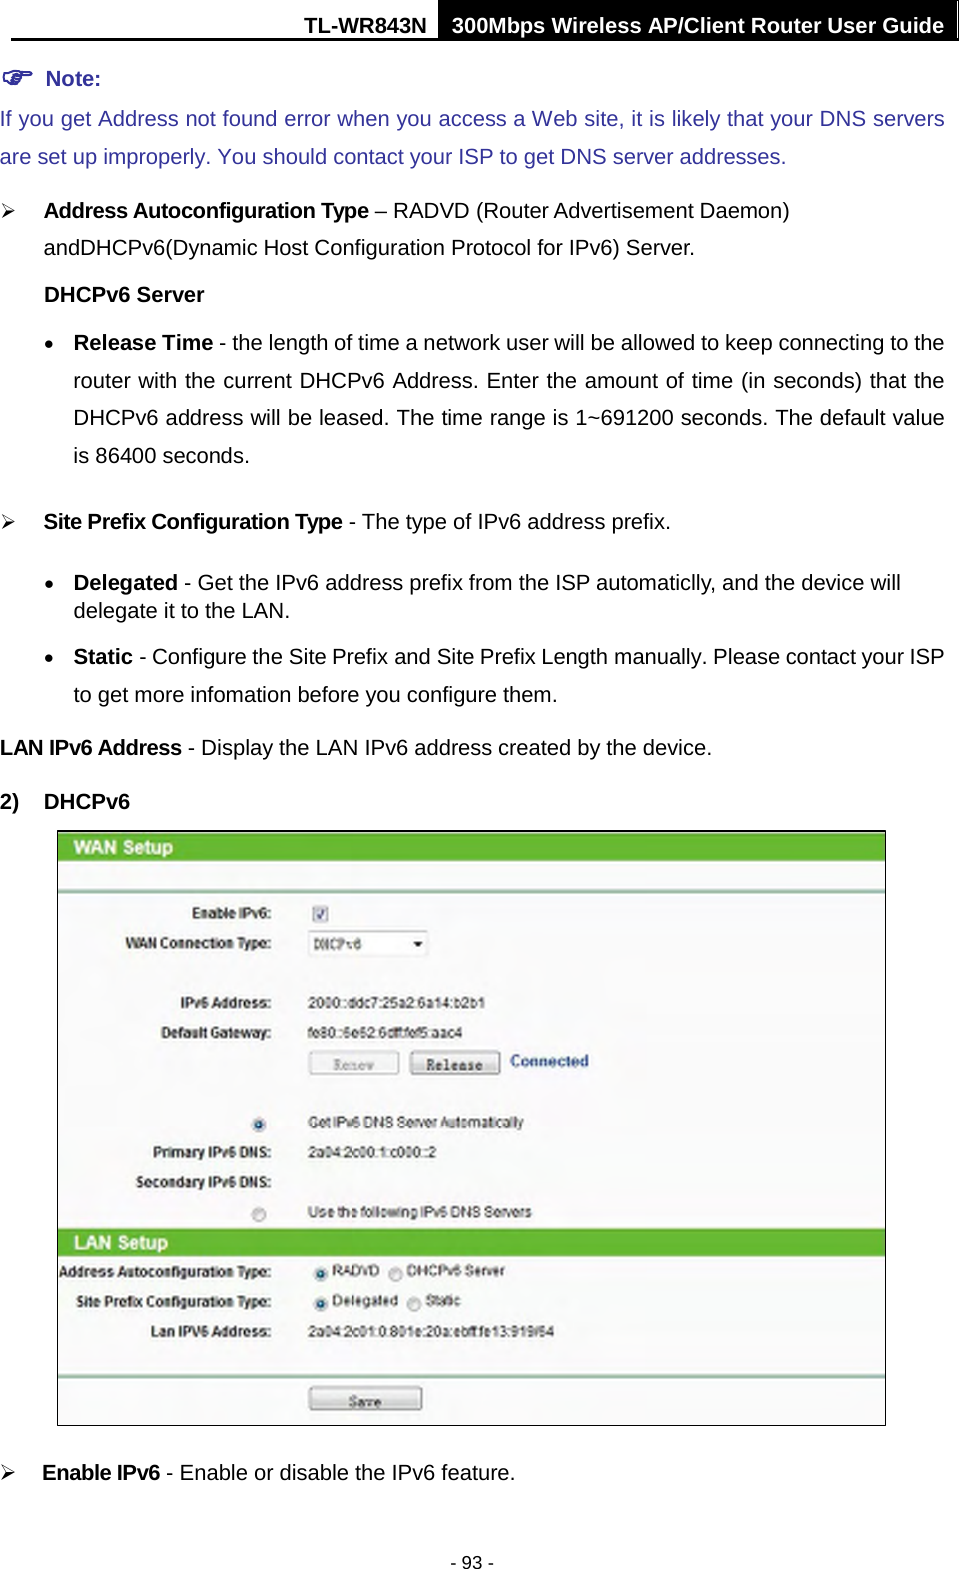 TL-WR843N 300Mbps Wireless AP/Client Router User Guide - 93 -  Note:If you get Address not found error when you access a Web site, it is likely that your DNS servers are set up improperly. You should contact your ISP to get DNS server addresses. Address Autoconfiguration Type – RADVD (Router Advertisement Daemon)andDHCPv6(Dynamic Host Configuration Protocol for IPv6) Server.DHCPv6 Server•Release Time - the length of time a network user will be allowed to keep connecting to therouter with the current DHCPv6 Address. Enter the amount of time (in seconds) that theDHCPv6 address will be leased. The time range is 1~691200 seconds. The default valueis 86400 seconds.Site Prefix Configuration Type - The type of IPv6 address prefix.•Delegated - Get the IPv6 address prefix from the ISP automaticlly, and the device willdelegate it to the LAN.•Static - Configure the Site Prefix and Site Prefix Length manually. Please contact your ISPto get more infomation before you configure them.LAN IPv6 Address - Display the LAN IPv6 address created by the device. 2) DHCPv6Enable IPv6 - Enable or disable the IPv6 feature.